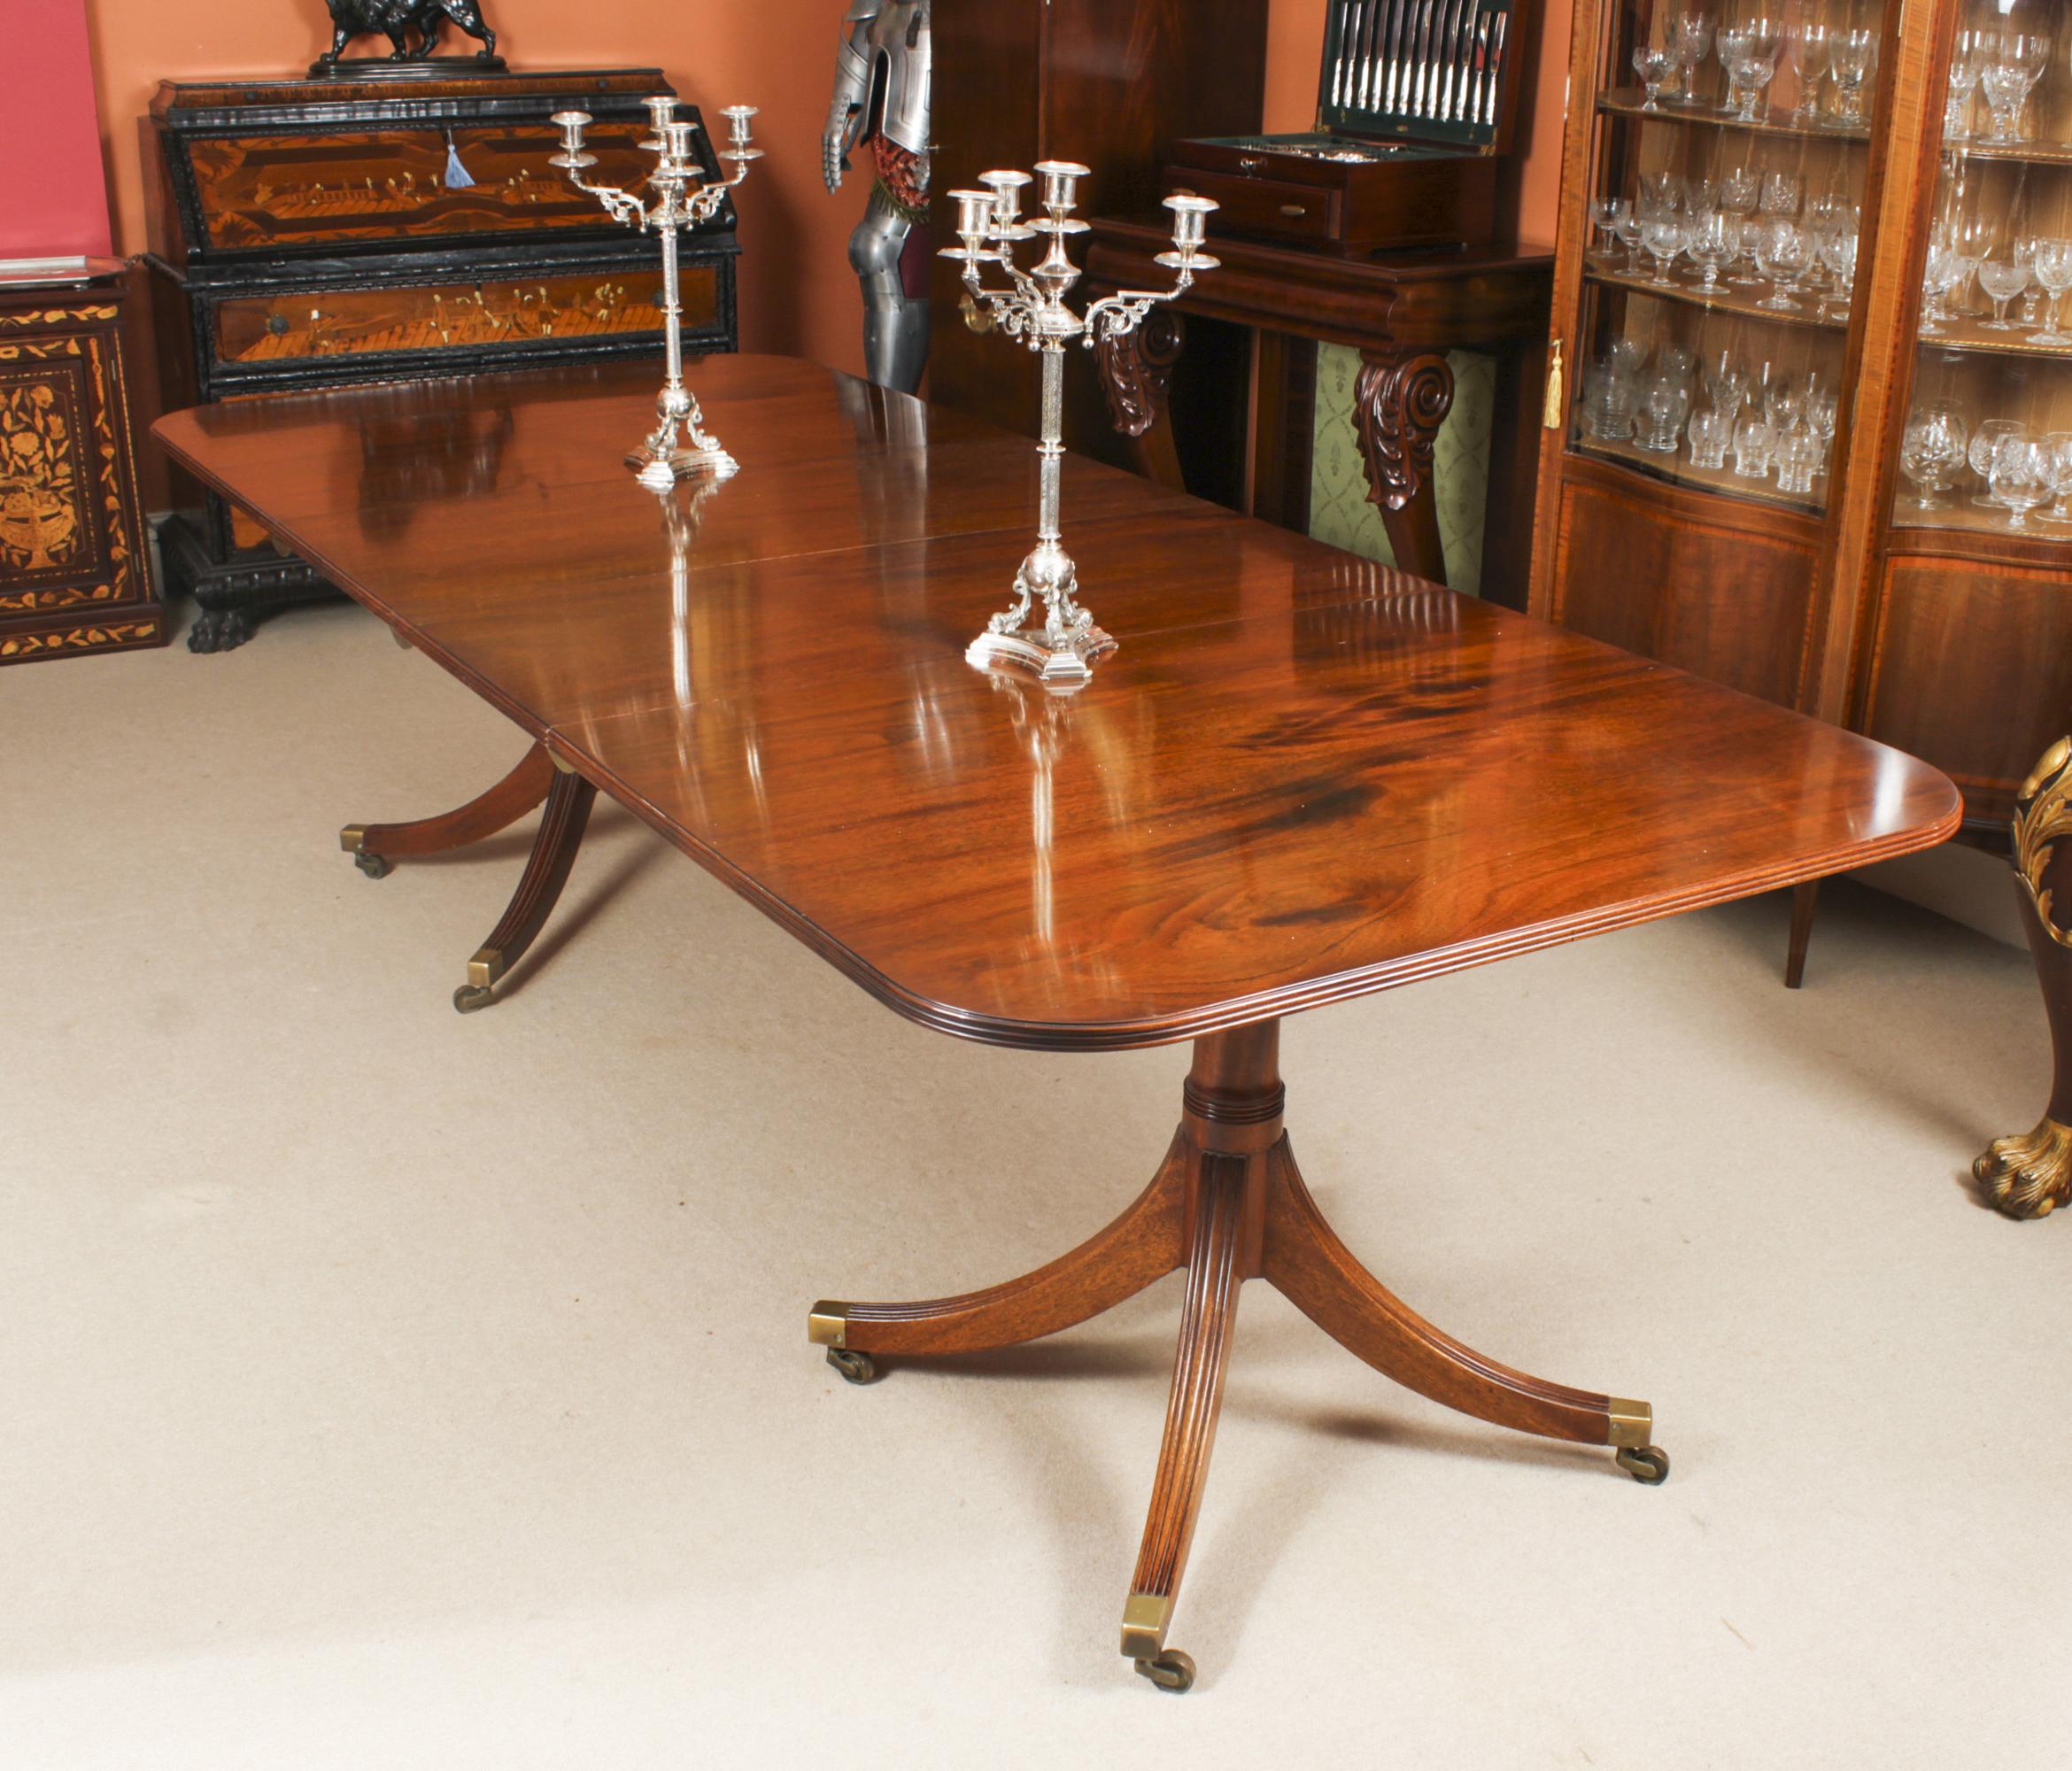 This is a fabulous Vintage Regency Revival dining table by the master cabinet maker William Tillman, Circa 1975 in date.

It is made of stunning solid flame mahogany and is raised on twin 